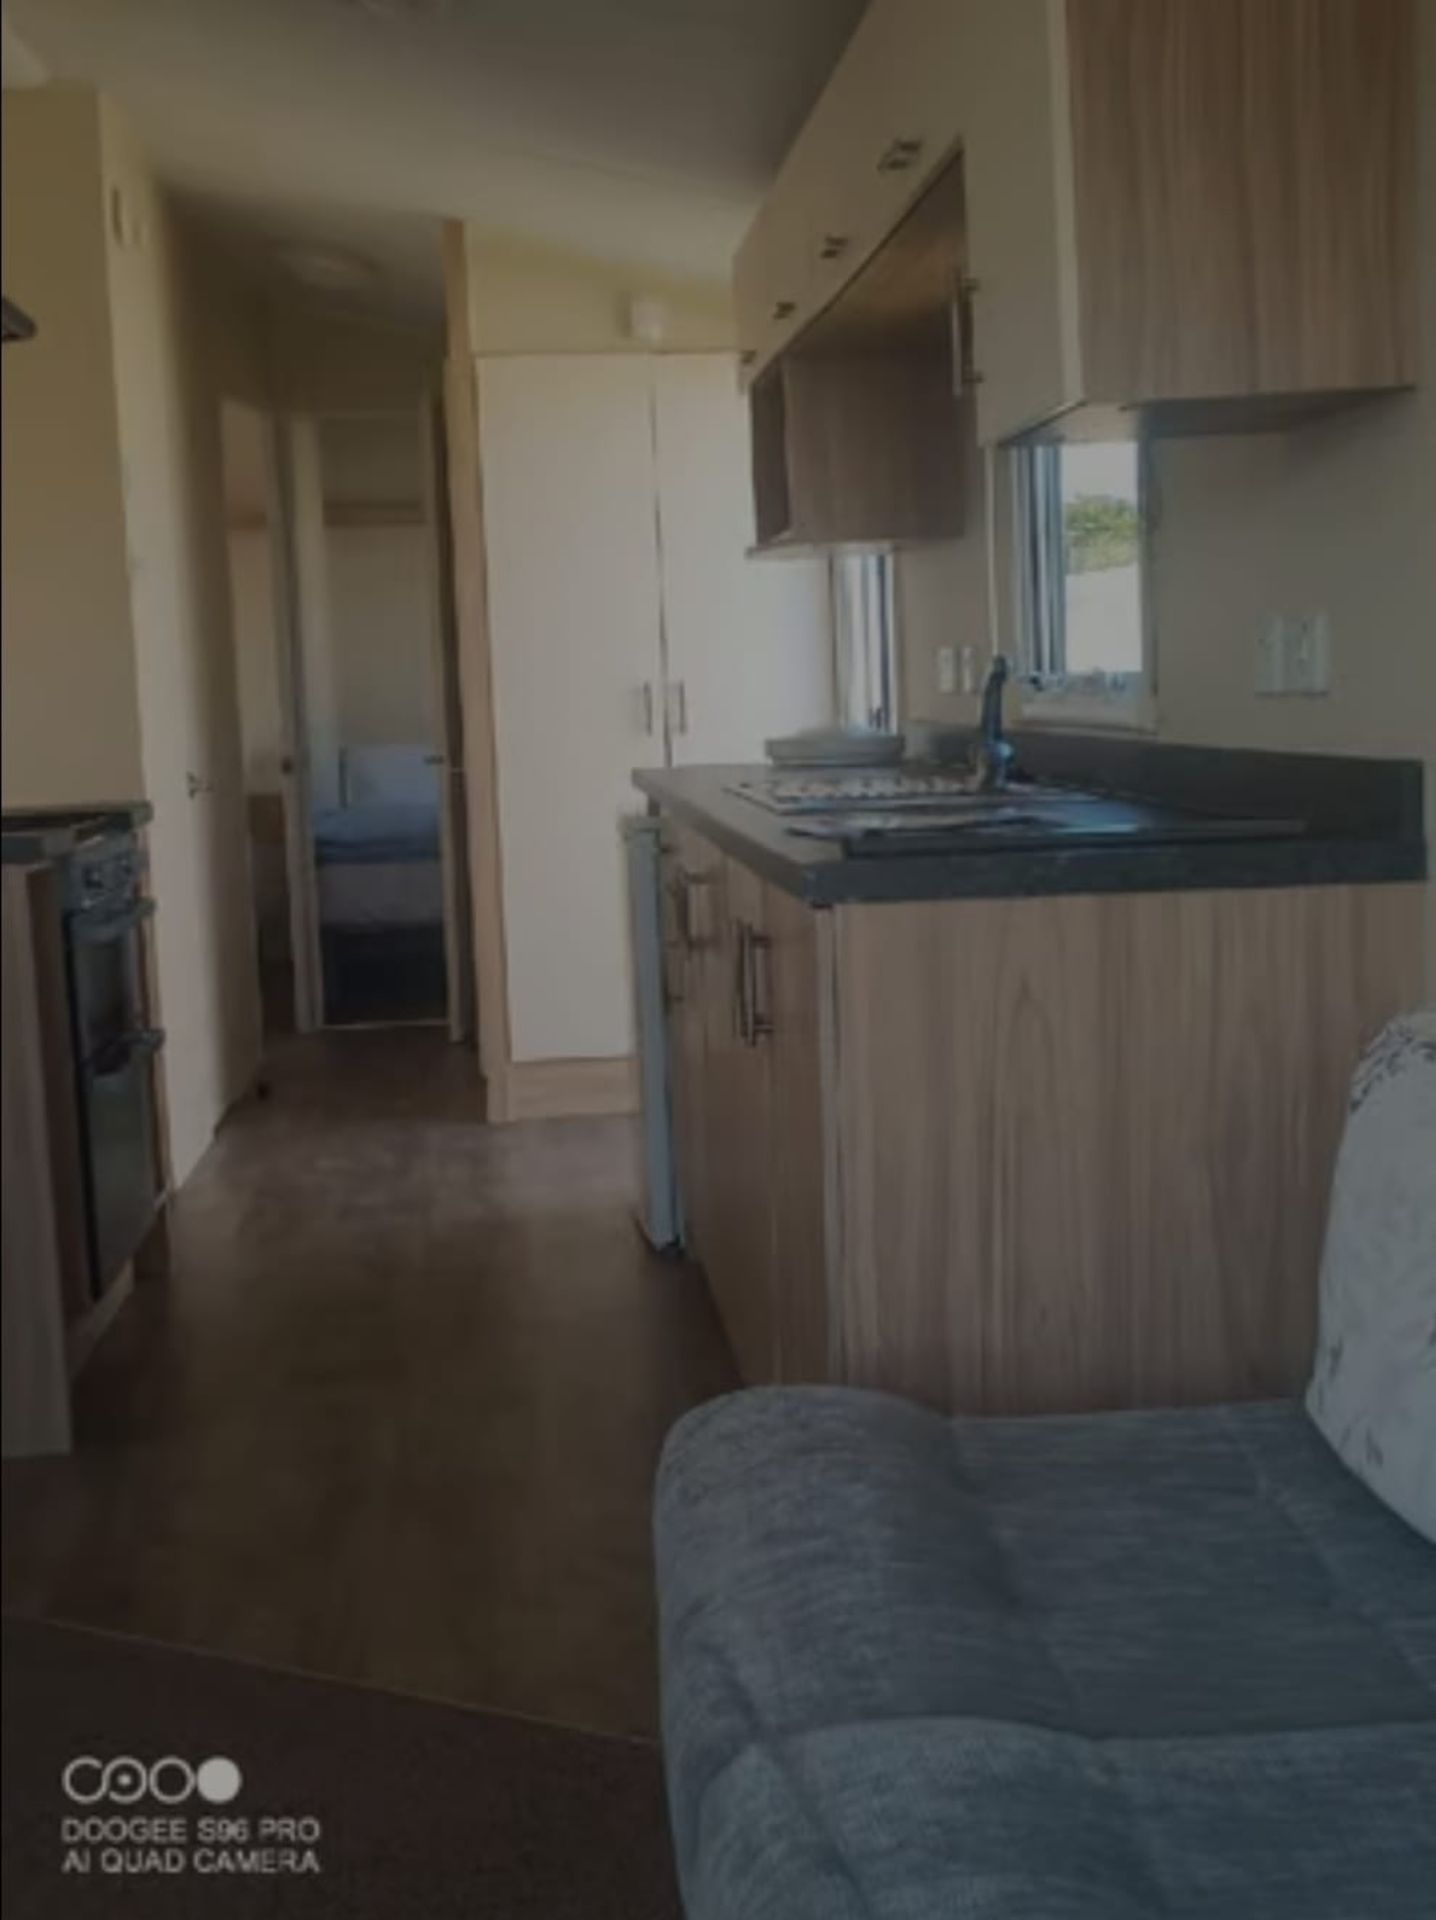 2015 WILLERBY ECO SALSA 3 BEDROOM holiday home ON-SITE SALE. **ON SALE** - Image 13 of 13